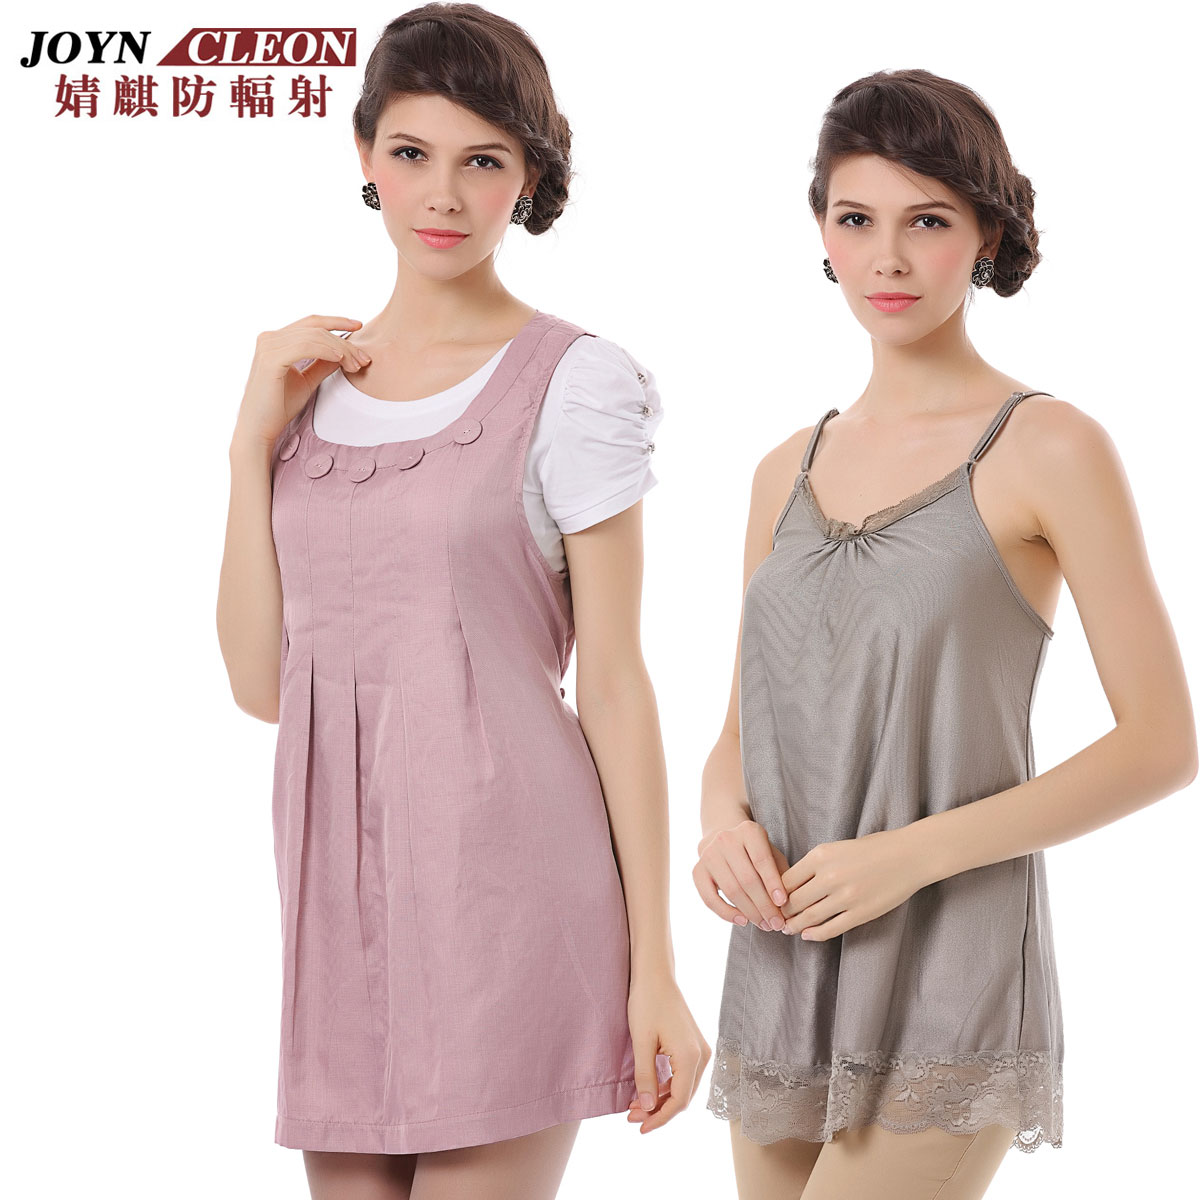 Joyncleon qi radiation-resistant maternity clothing maternity clothing silver fiber autumn and winter clothes